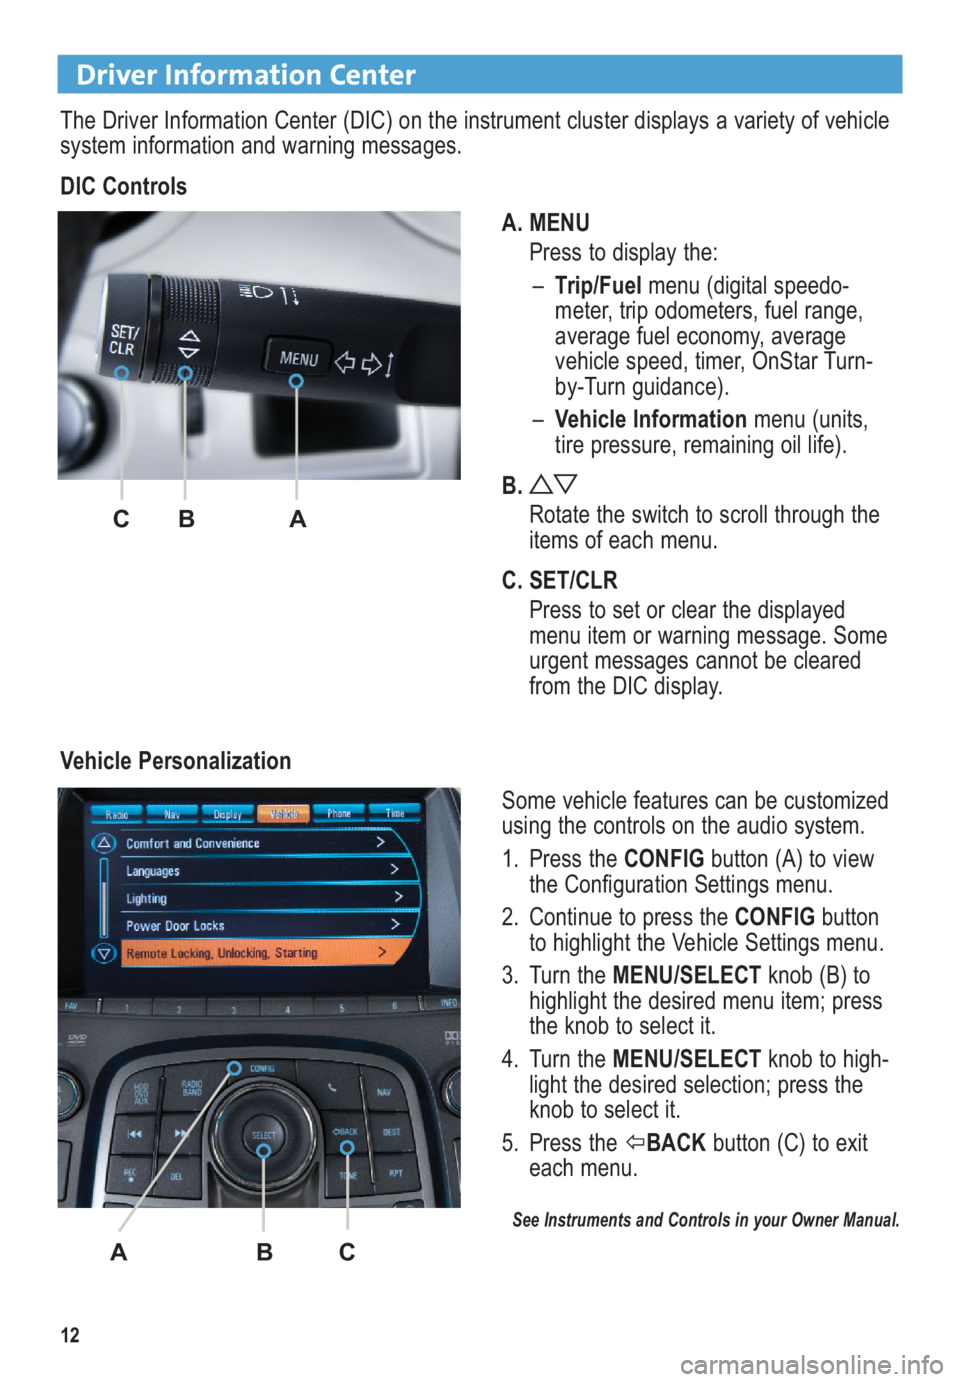 BUICK LACROSSE 2010  Get To Know Guide 12
Driver Information Center
The Driver Information Center (DIC) on the instrument cluster displays a variety of vehicle
system information and warning messages.
DIC Controls 
A. MENU
Press to display